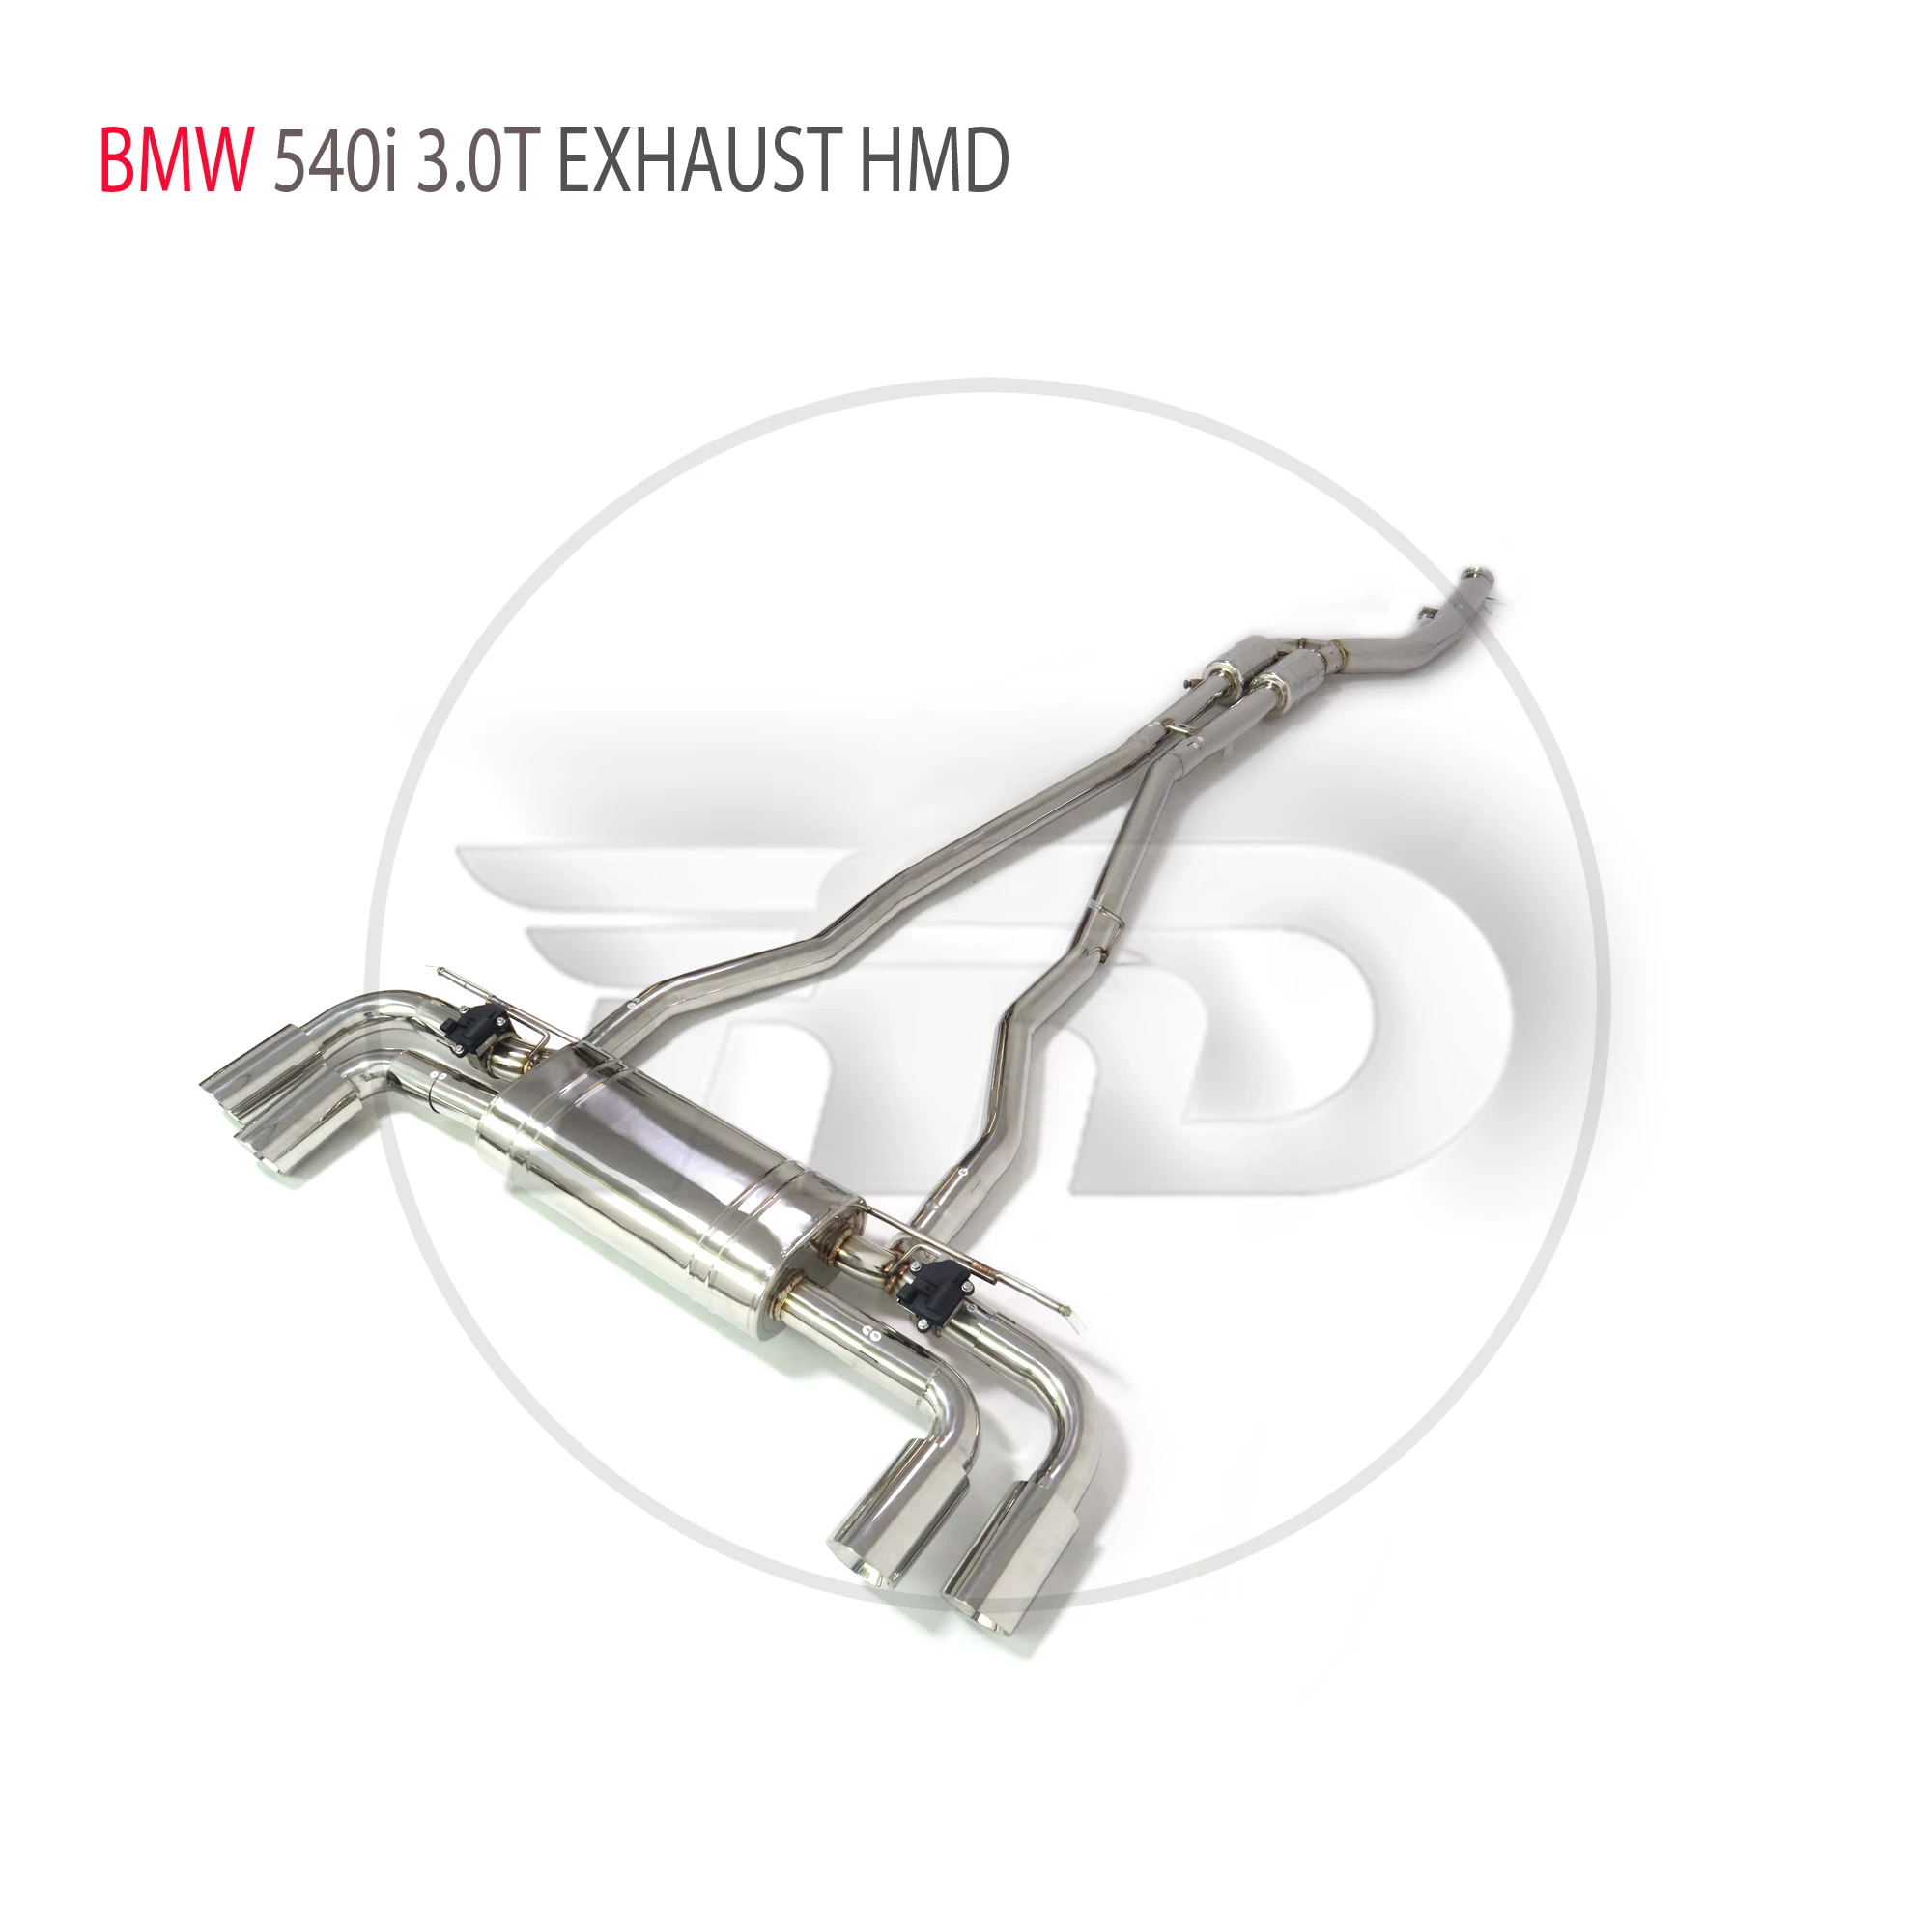 

HMD Stainless Steel Exhaust System Performance Catback for BMW 540i G30 B58 3.0T Auto Accesorios Electronic Valve Muffler